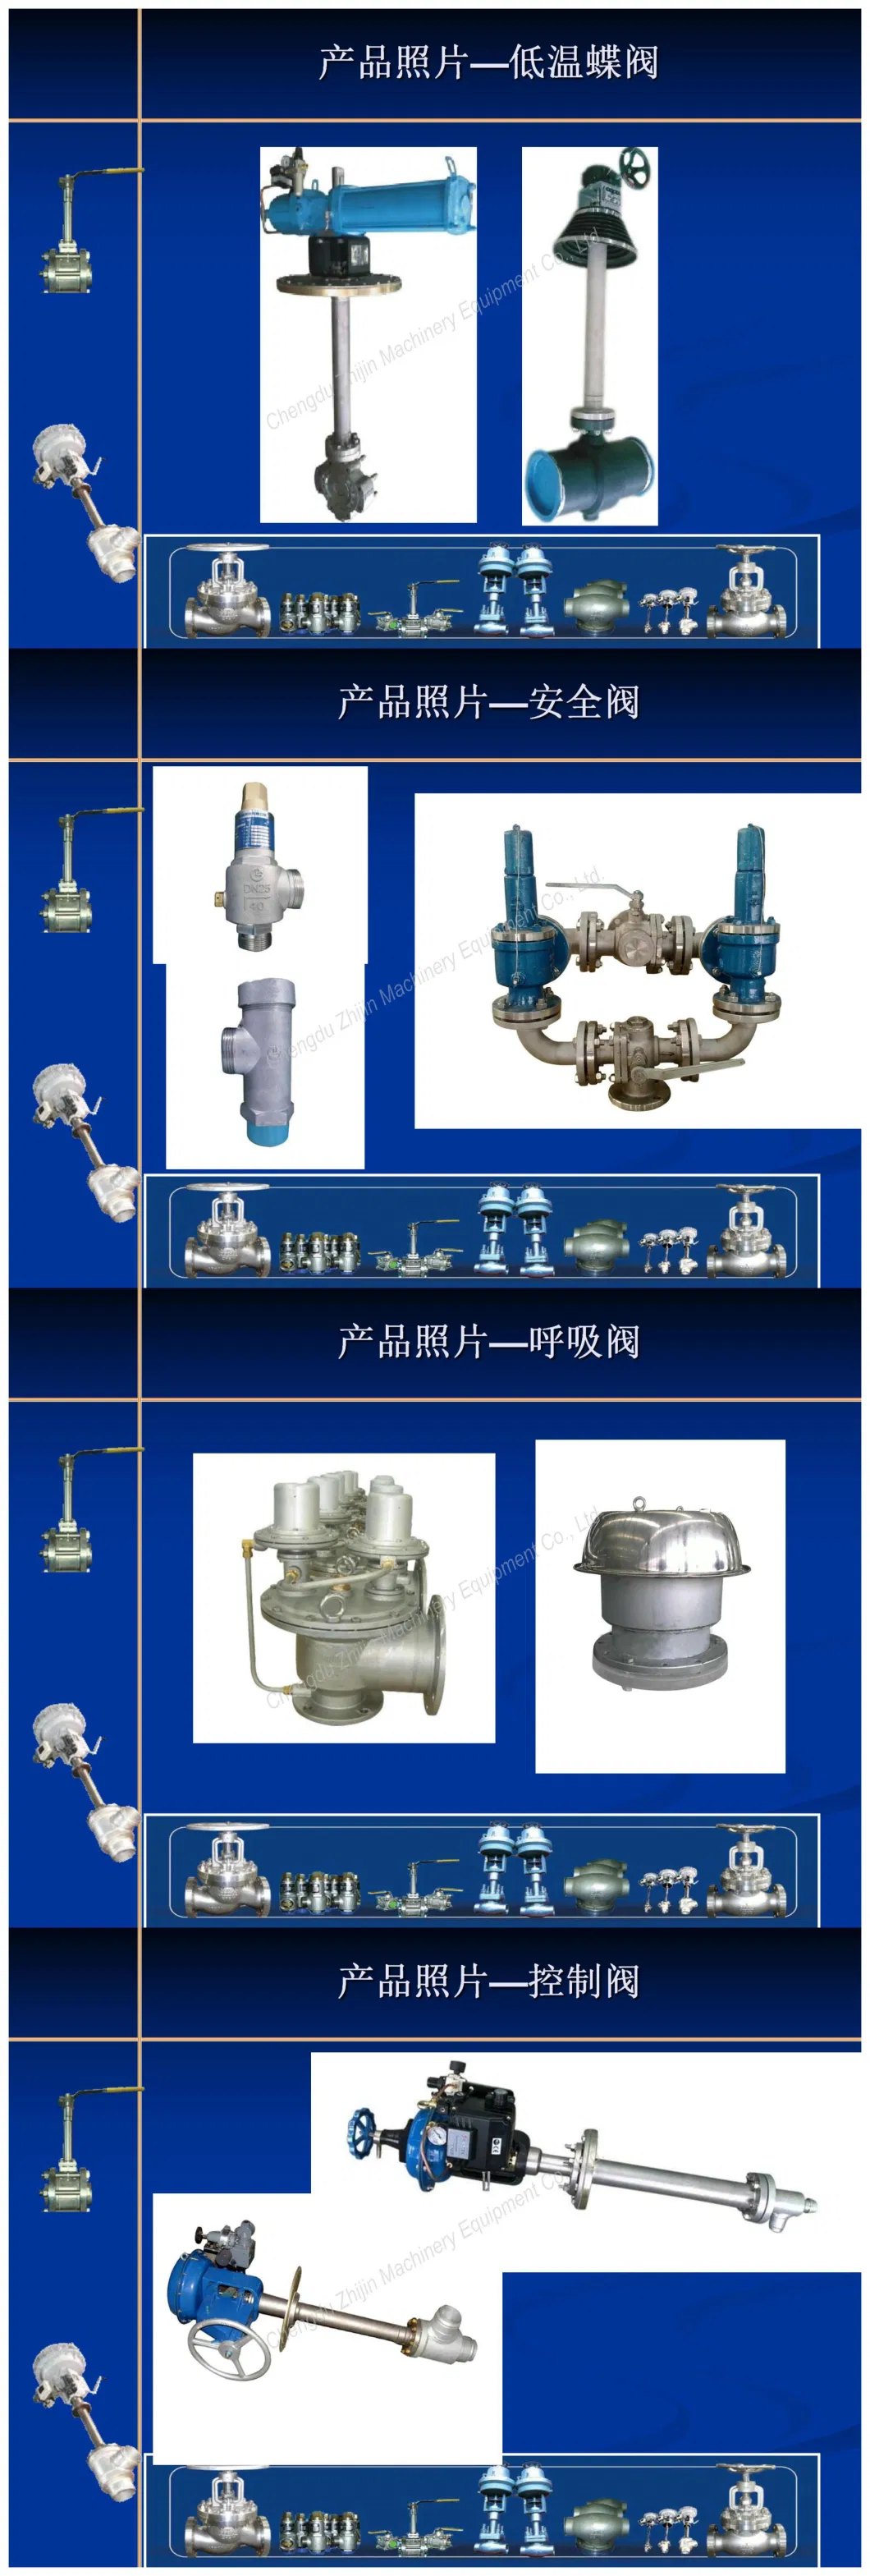 Cryogenic Butterfly/Diaphragm Control/Ball/Globe/Throttle/Check/Safety/Breathing/Three Way Valve/Liquid Hydrogen/Helium/Oxygen/Natural Gas/LNG/LPG/CNG Valve